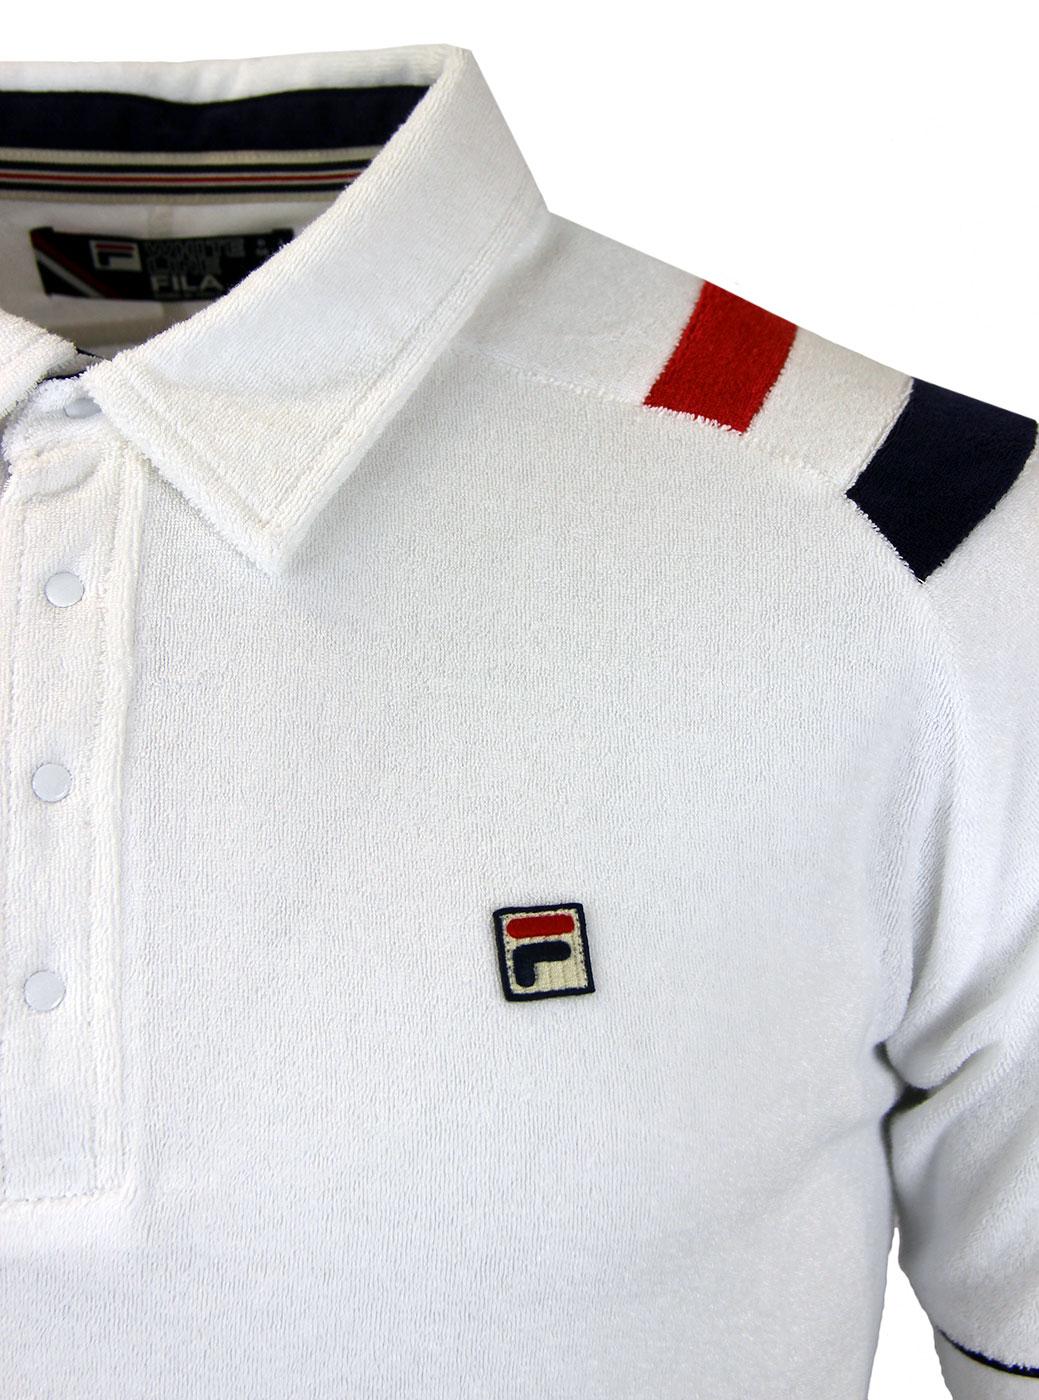 Vintage 1970s 1980s White Towelling Polo Shirt Top